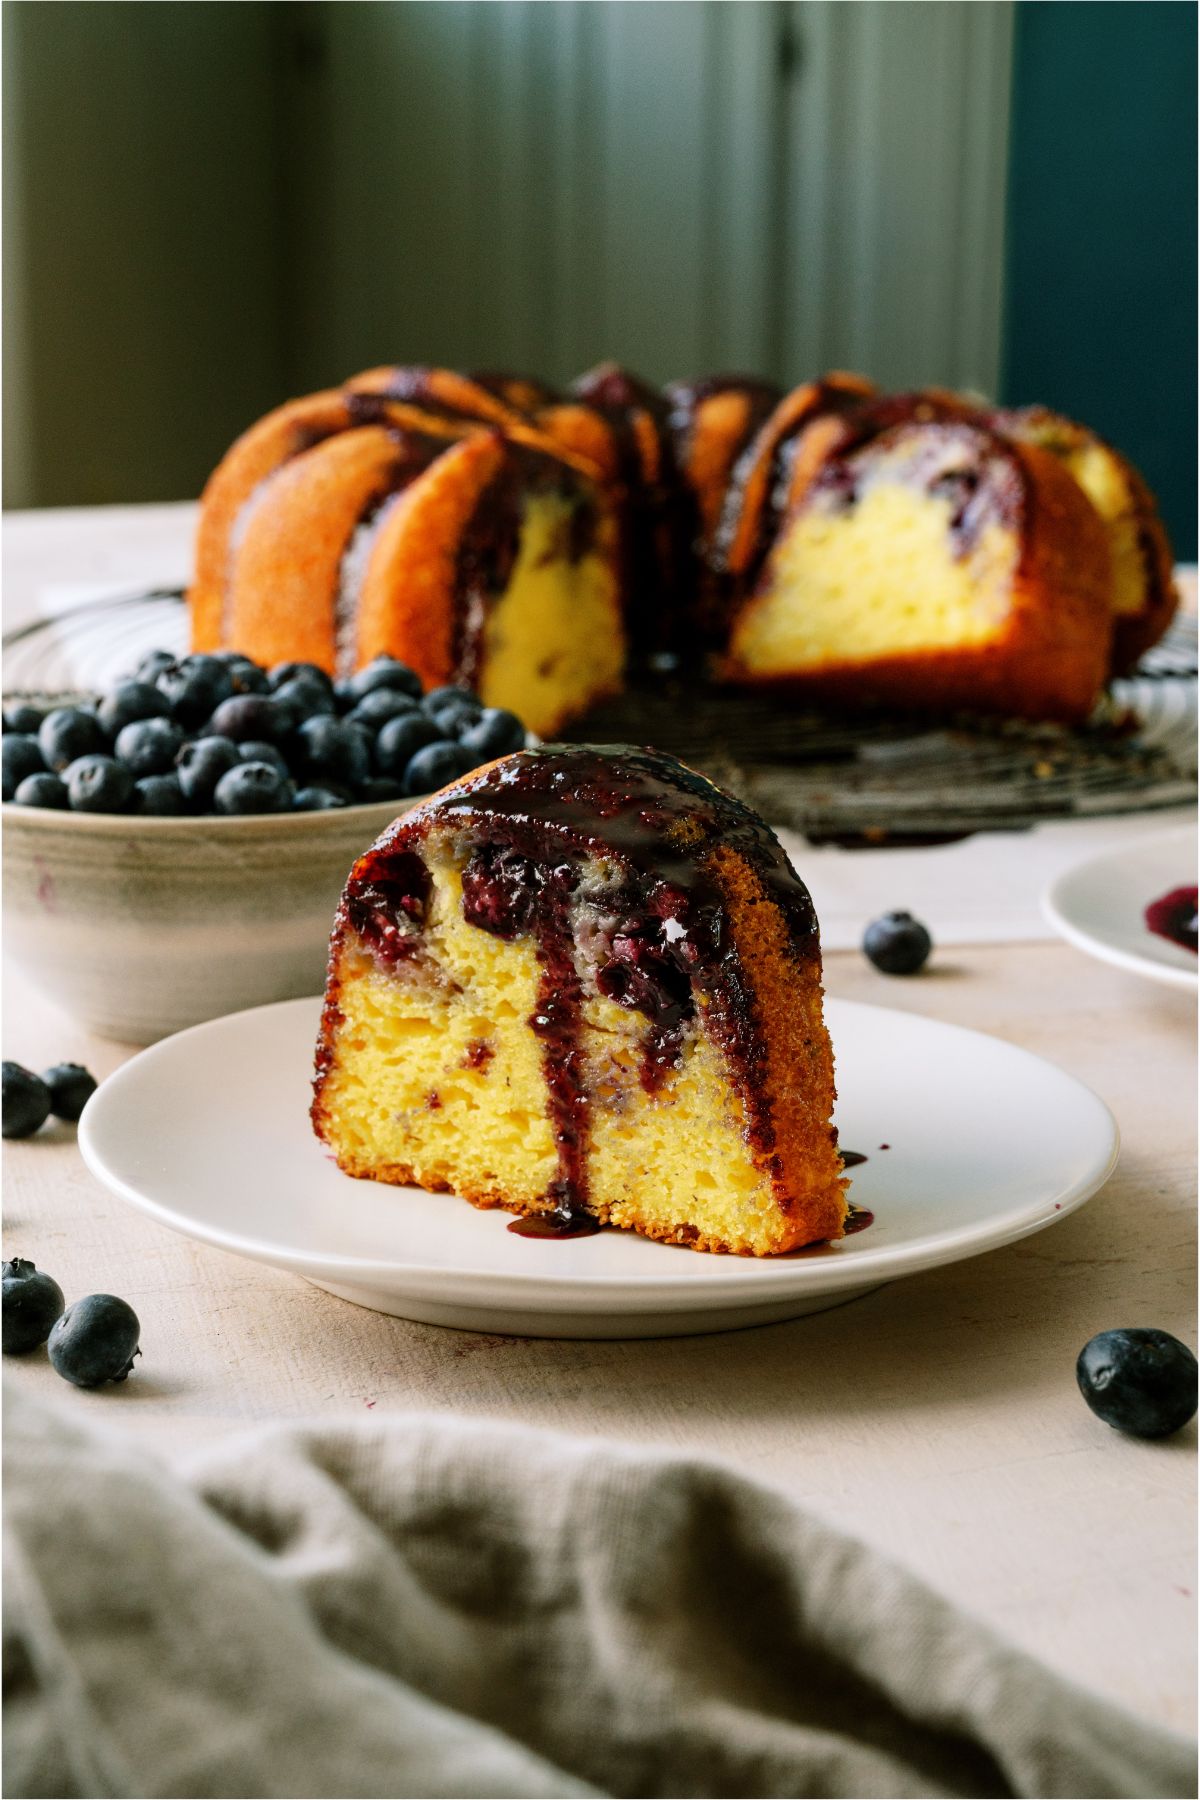 A slice of Lemon Blueberry Bundt Cake on a plate with the remaining cake in the background